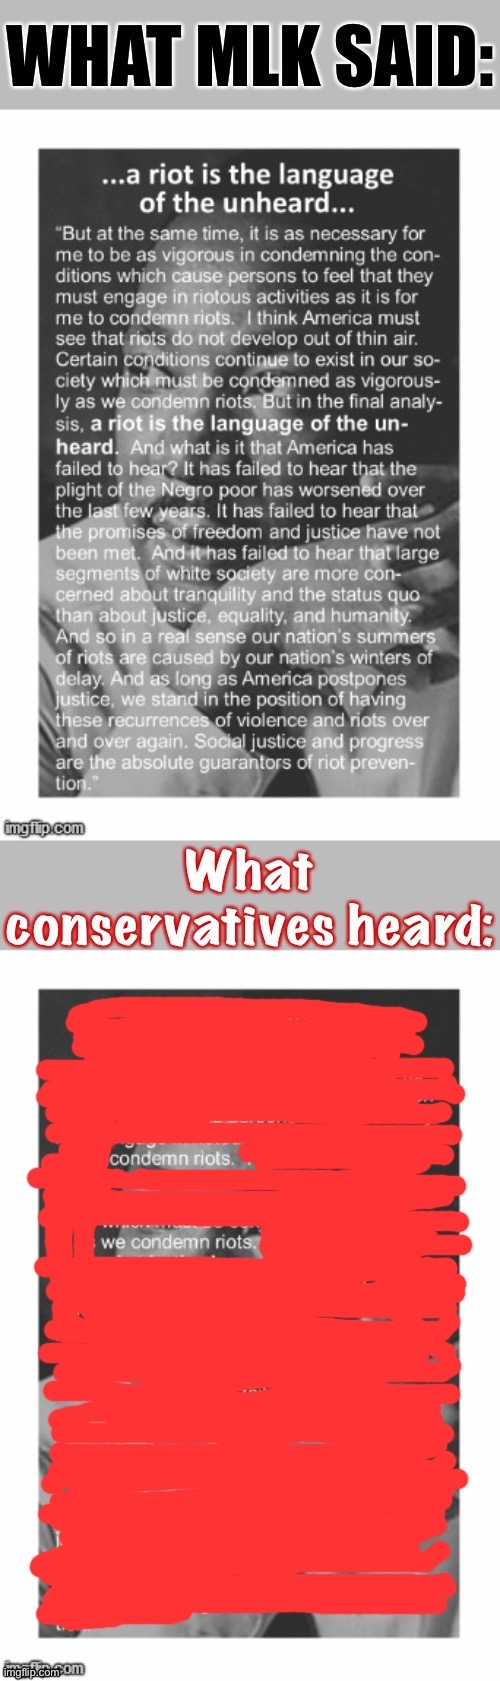 How to butcher an MLK quote, 101 | image tagged in mlk quote riots conservative logic | made w/ Imgflip meme maker